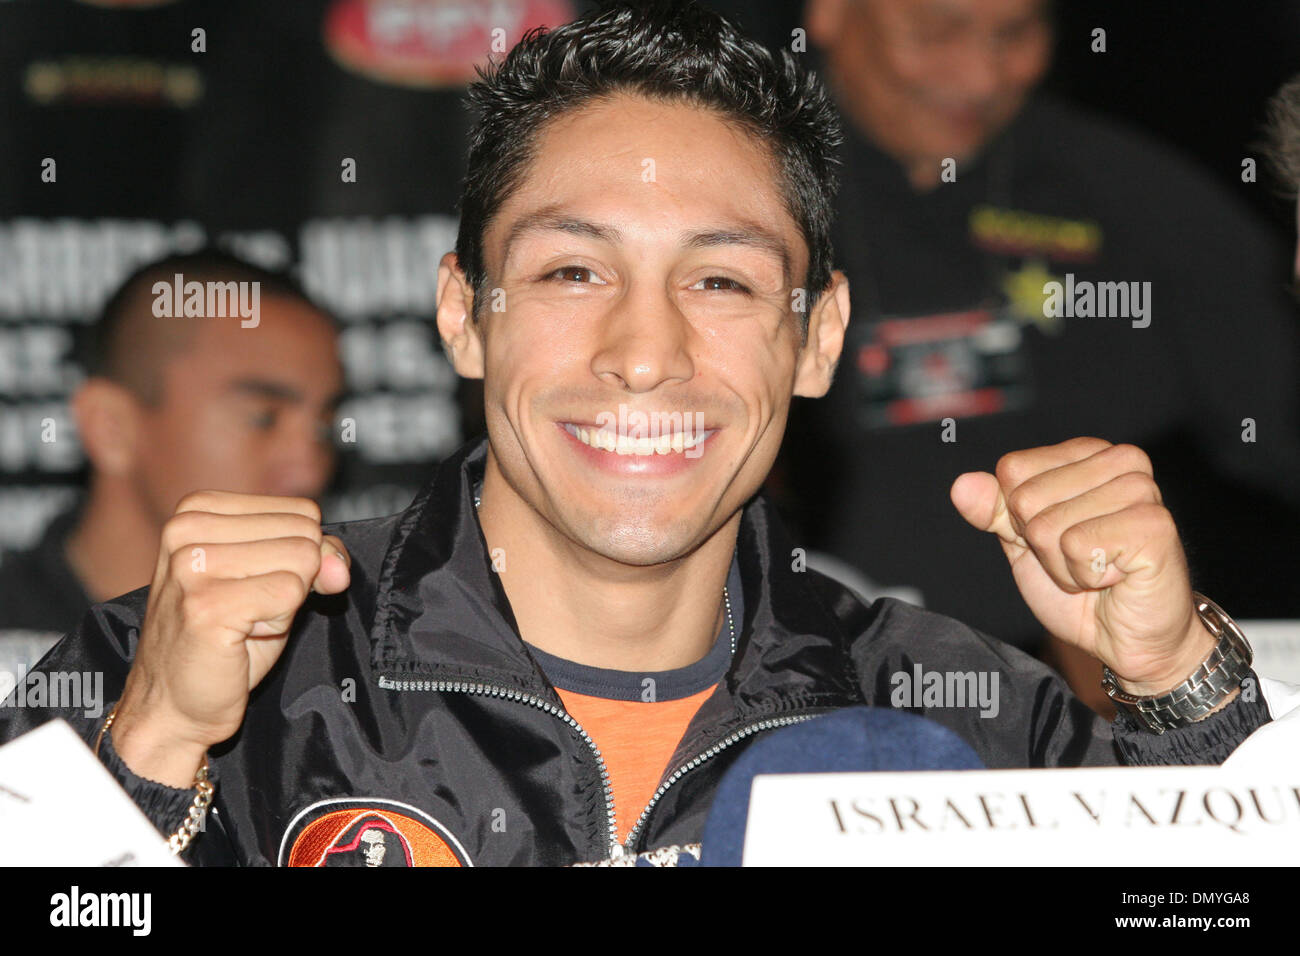 Sep 14, 2006; Las Vegas, NV, USA; BOXING: ISRAEL 'Magnifico' VASQUEZ at the Barrera vs Juarez ll press conference. Juarez is fighting Jhonny Gonzalez for the Super Bantamweight WBC World Title which is the Co Main Event Sept 16 at the MGM Grand Garden in Las Vegas, NV. Mandatory Credit: Photo by Mary Ann Owen/ZUMA Press. (©) Copyright 2006 by Mary Ann Owen Stock Photo